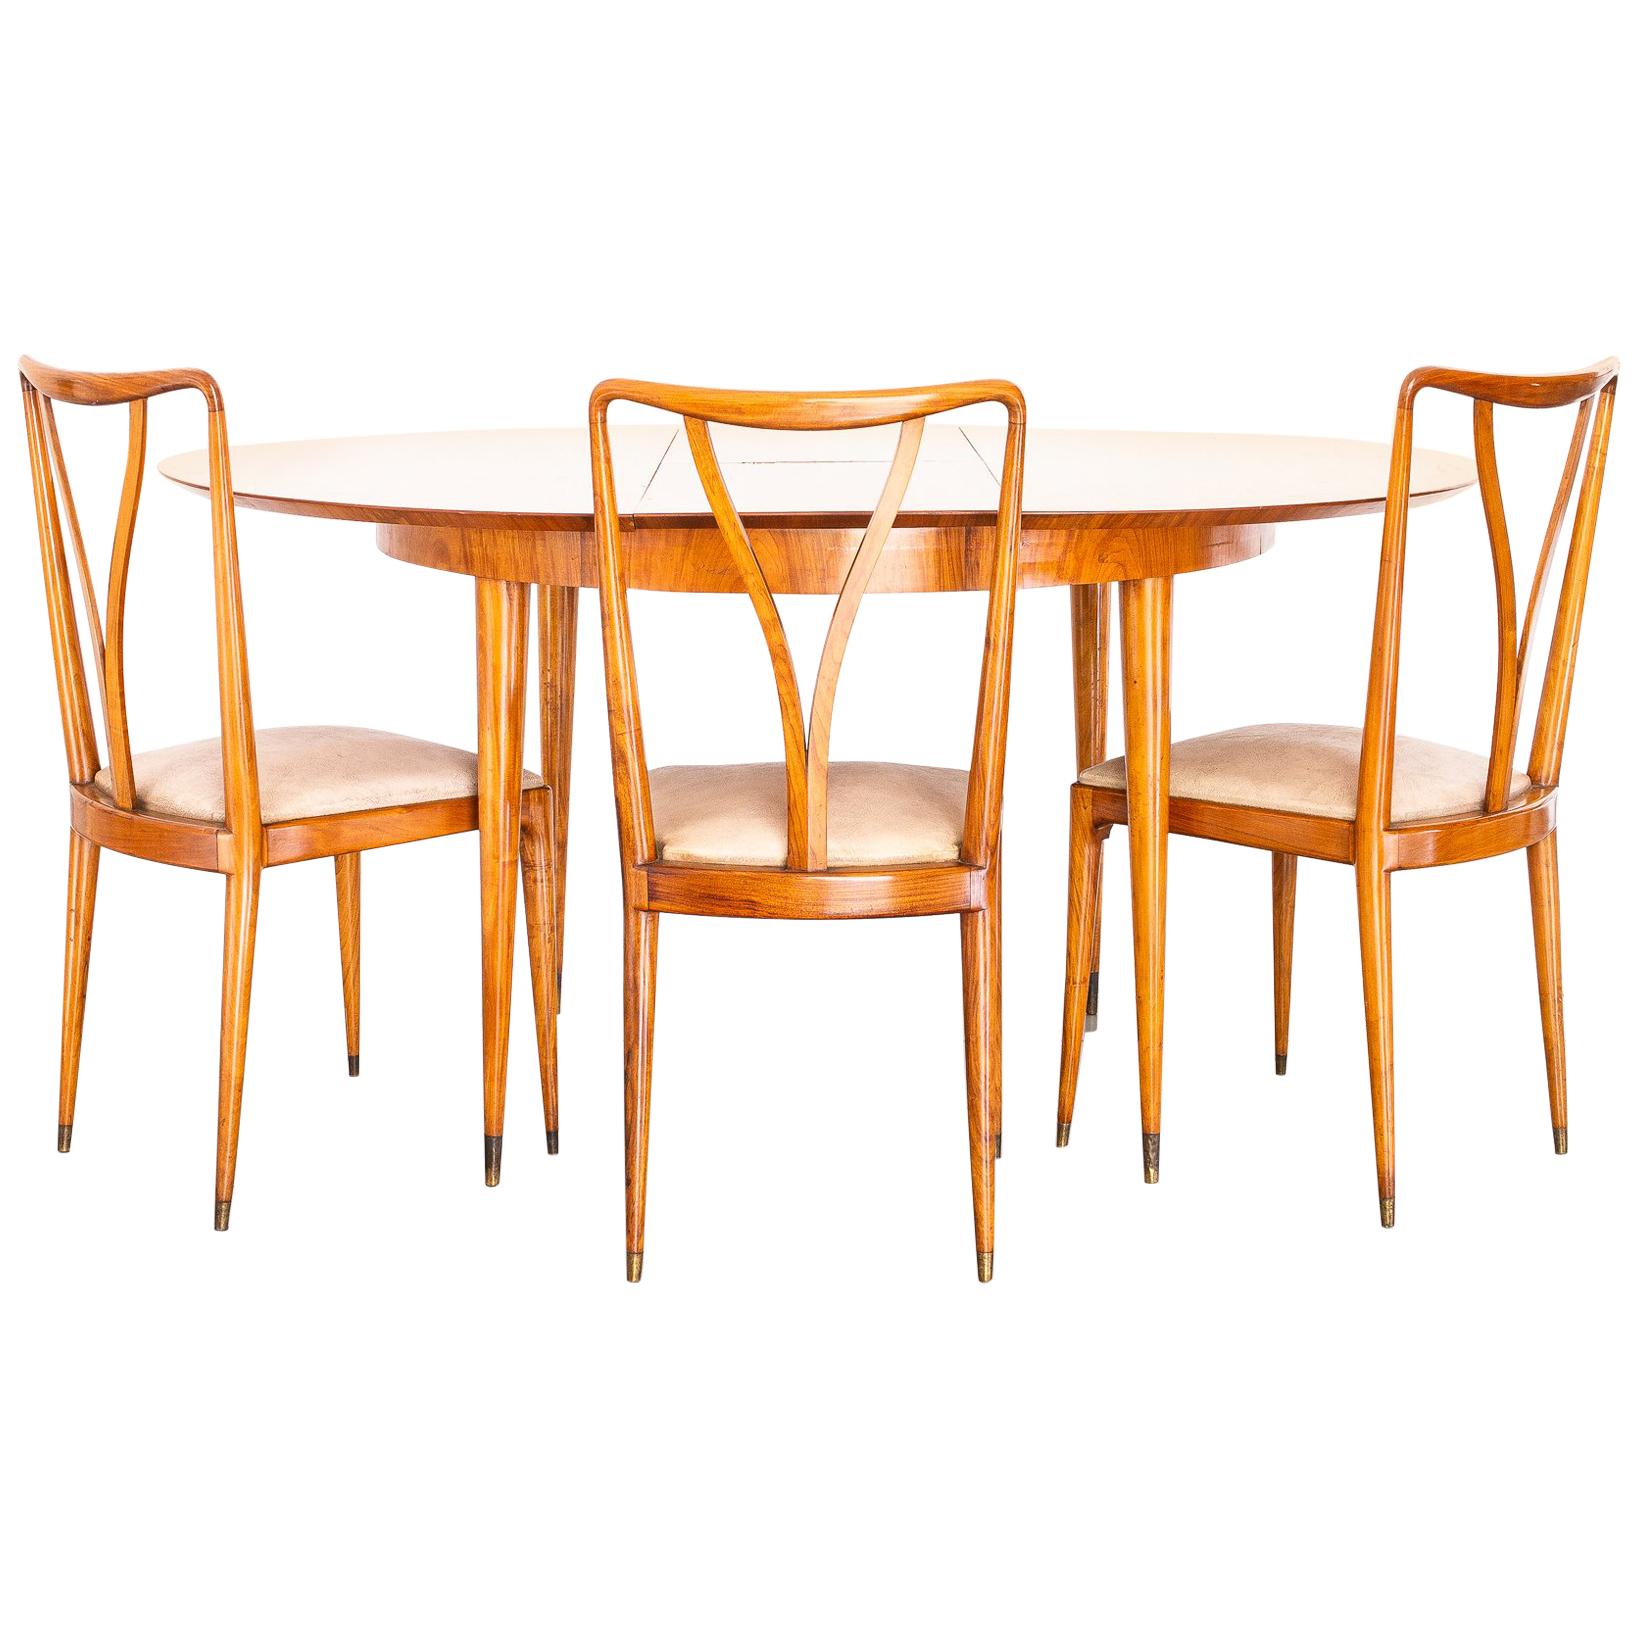 1950s Six Seats Dining Set in Cavi�úna Wood, by Giuseppe Scapinelli